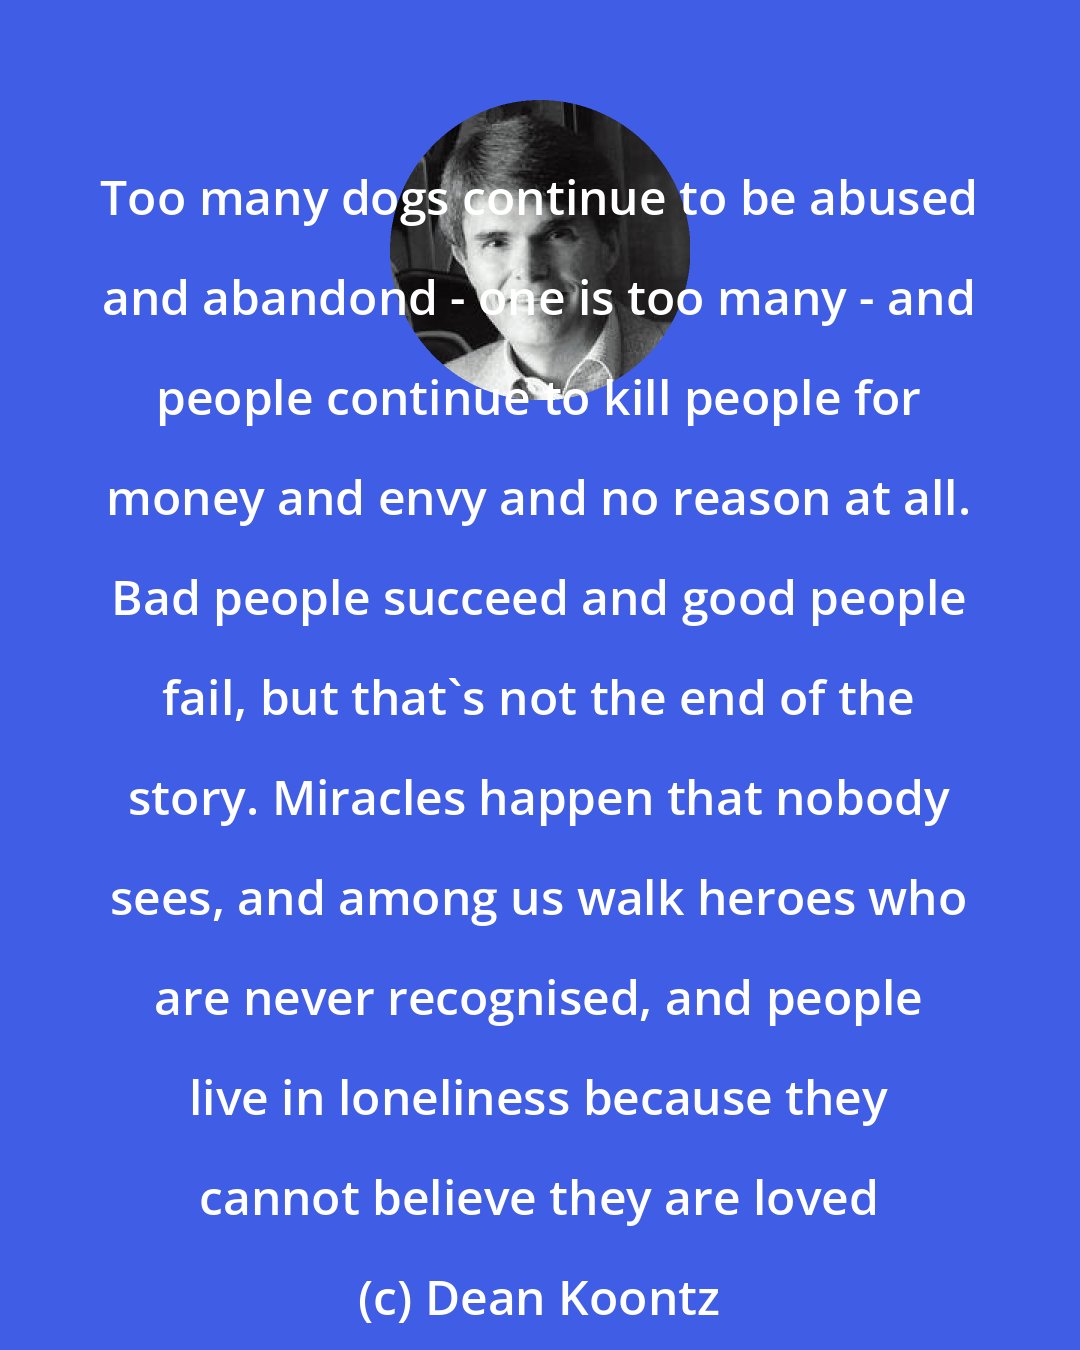 Dean Koontz: Too many dogs continue to be abused and abandond - one is too many - and people continue to kill people for money and envy and no reason at all. Bad people succeed and good people fail, but that's not the end of the story. Miracles happen that nobody sees, and among us walk heroes who are never recognised, and people live in loneliness because they cannot believe they are loved